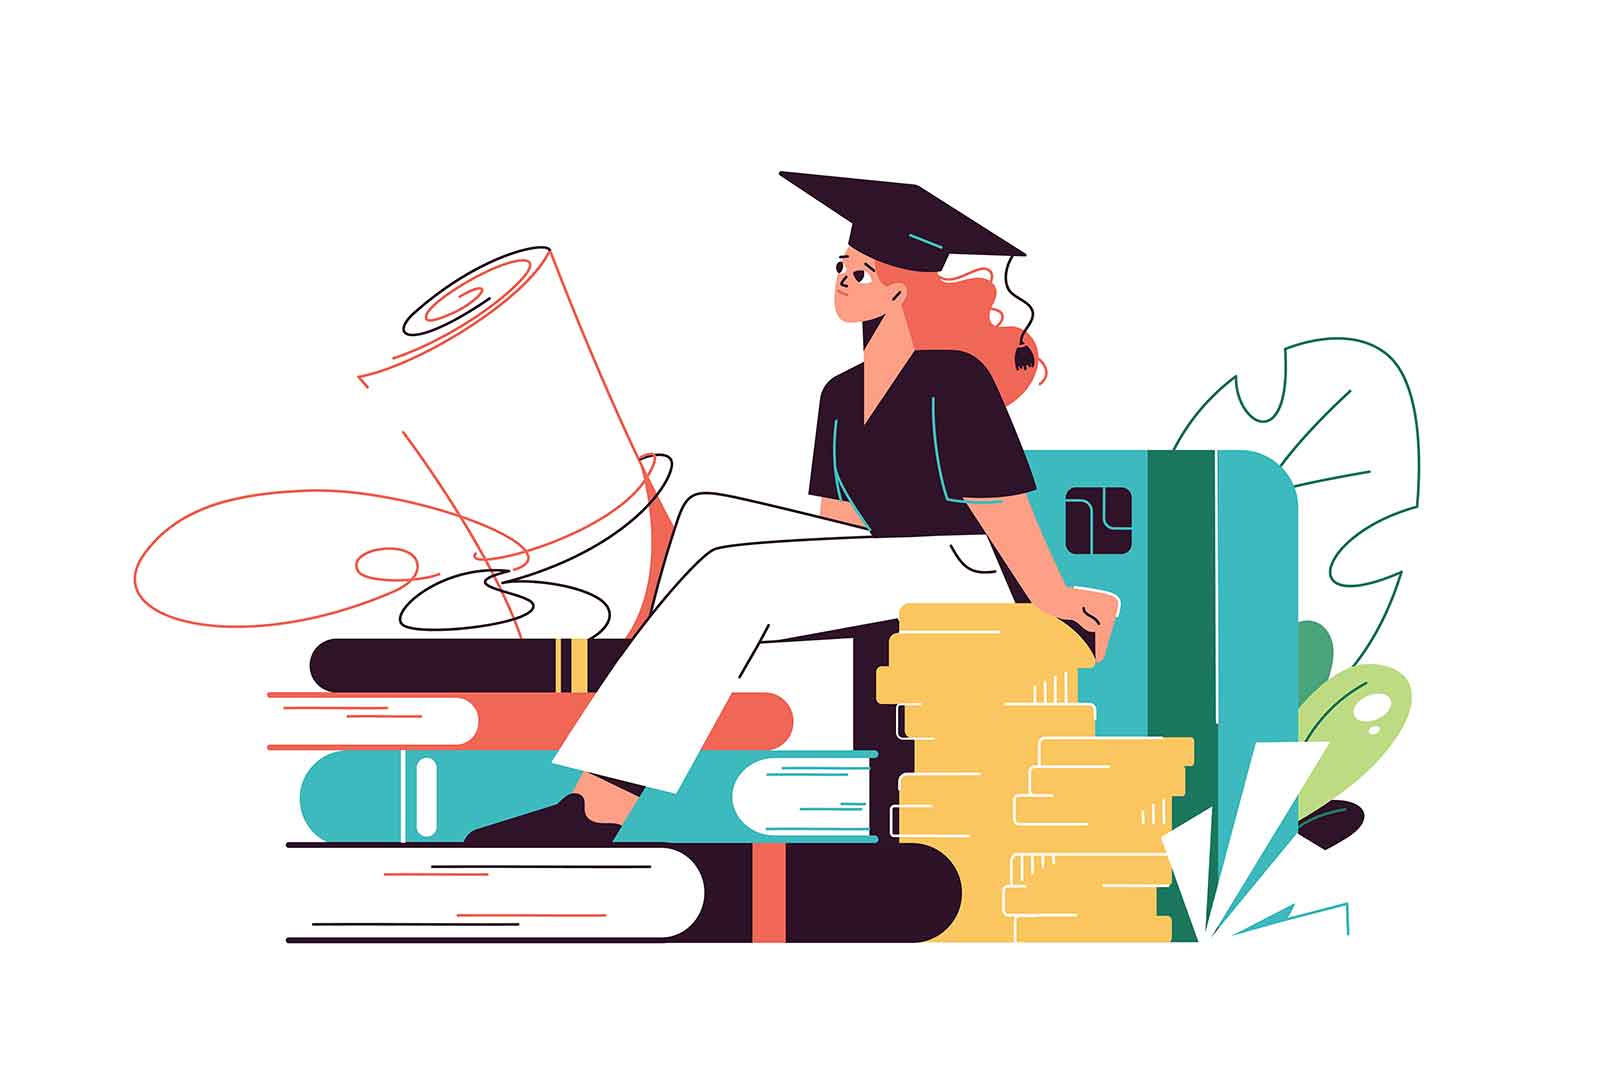 Cost of education, student sitting on books, concept vector illustration. Bank card and leaves in the background. Paying for education.